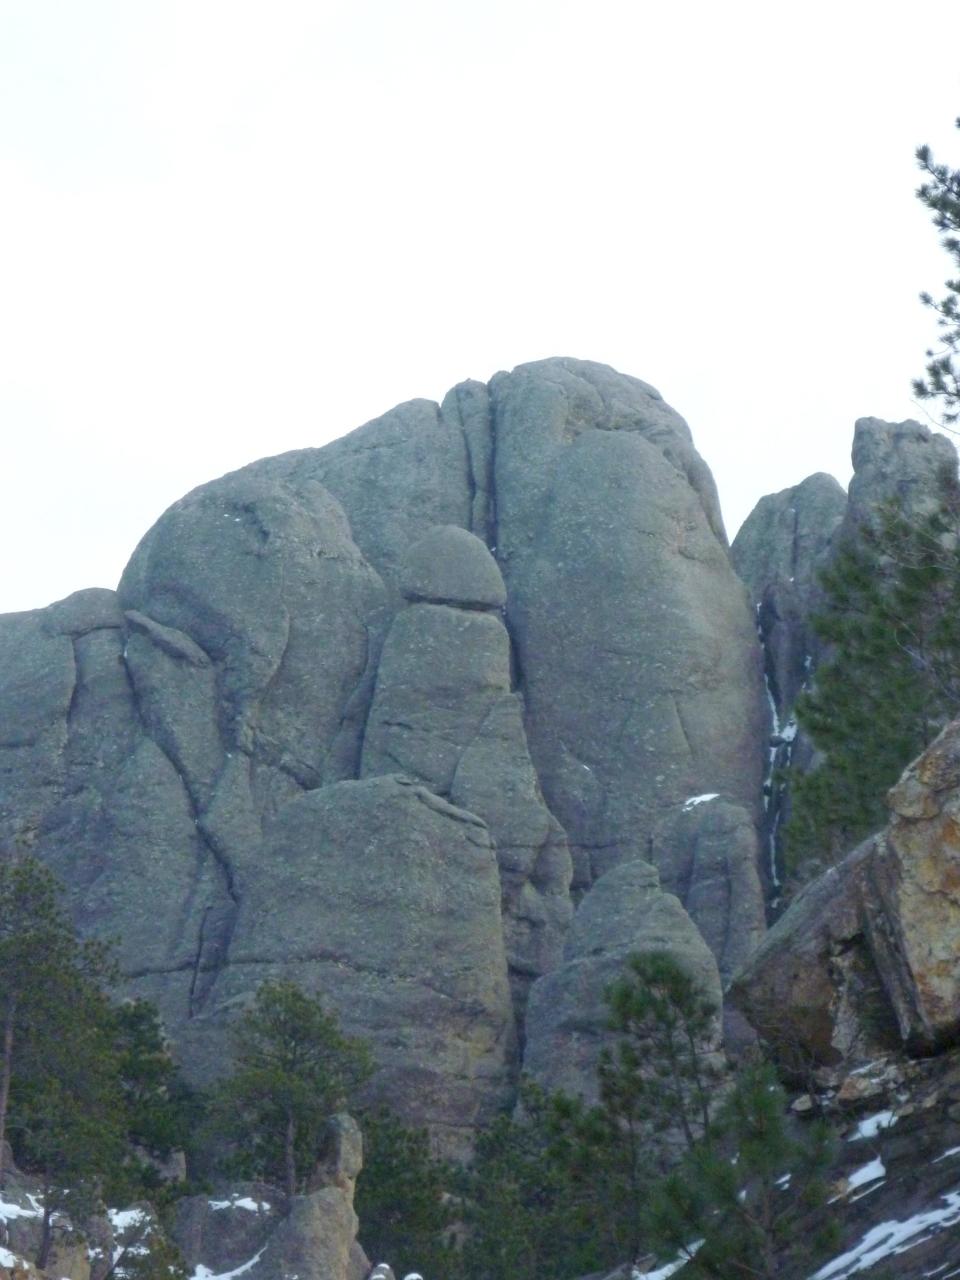 A phallic rock formation among the other rocks